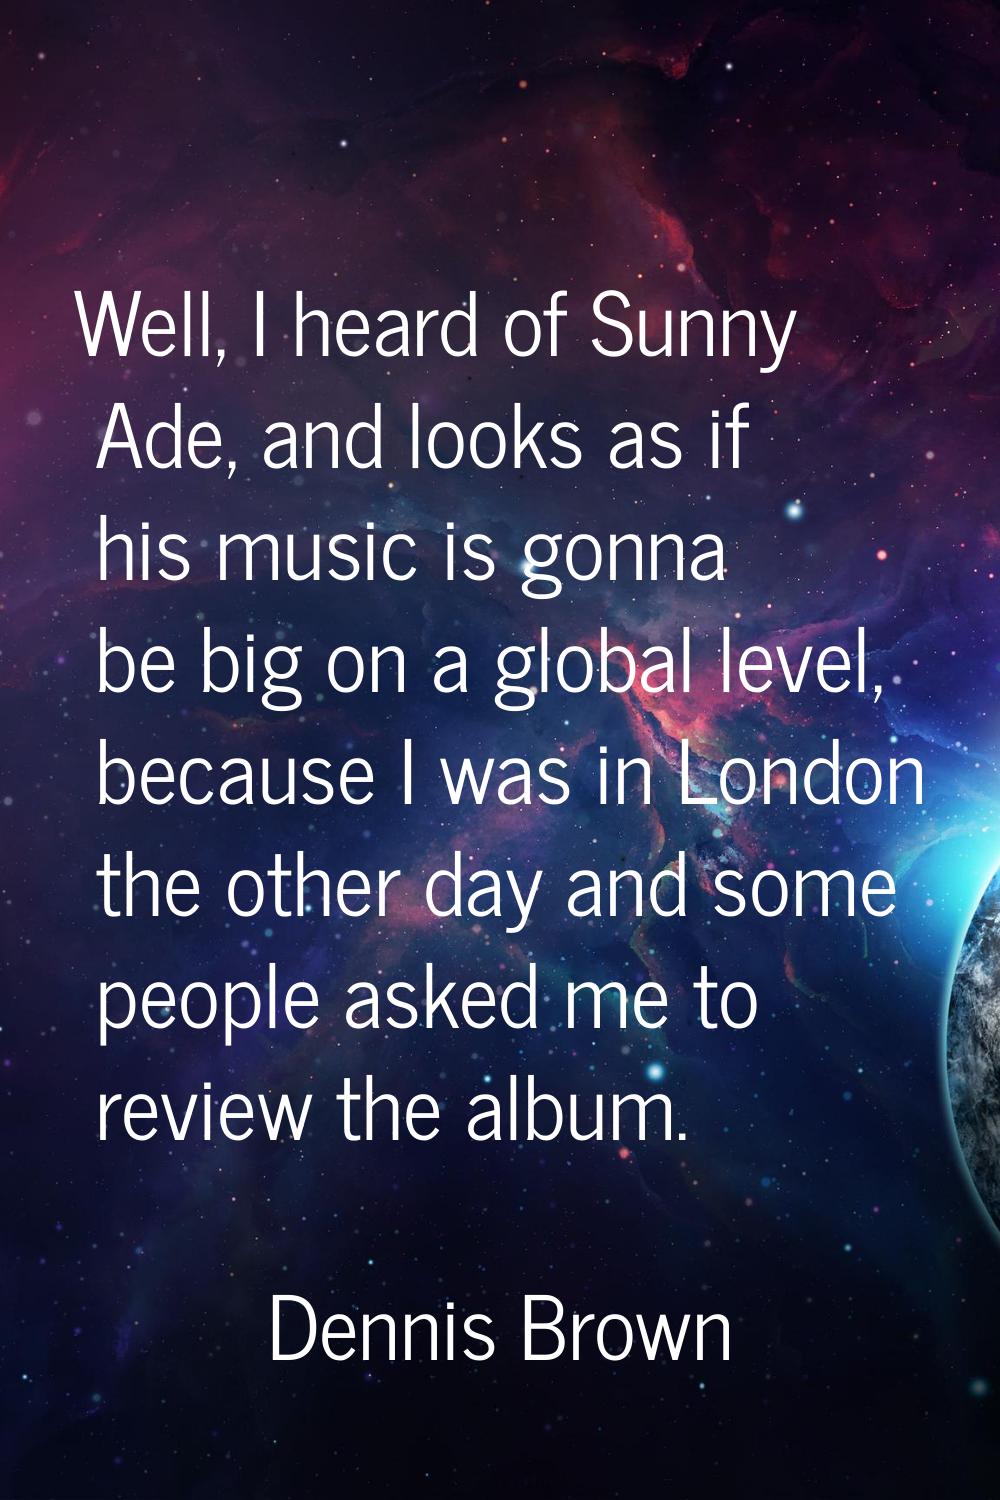 Well, I heard of Sunny Ade, and looks as if his music is gonna be big on a global level, because I 